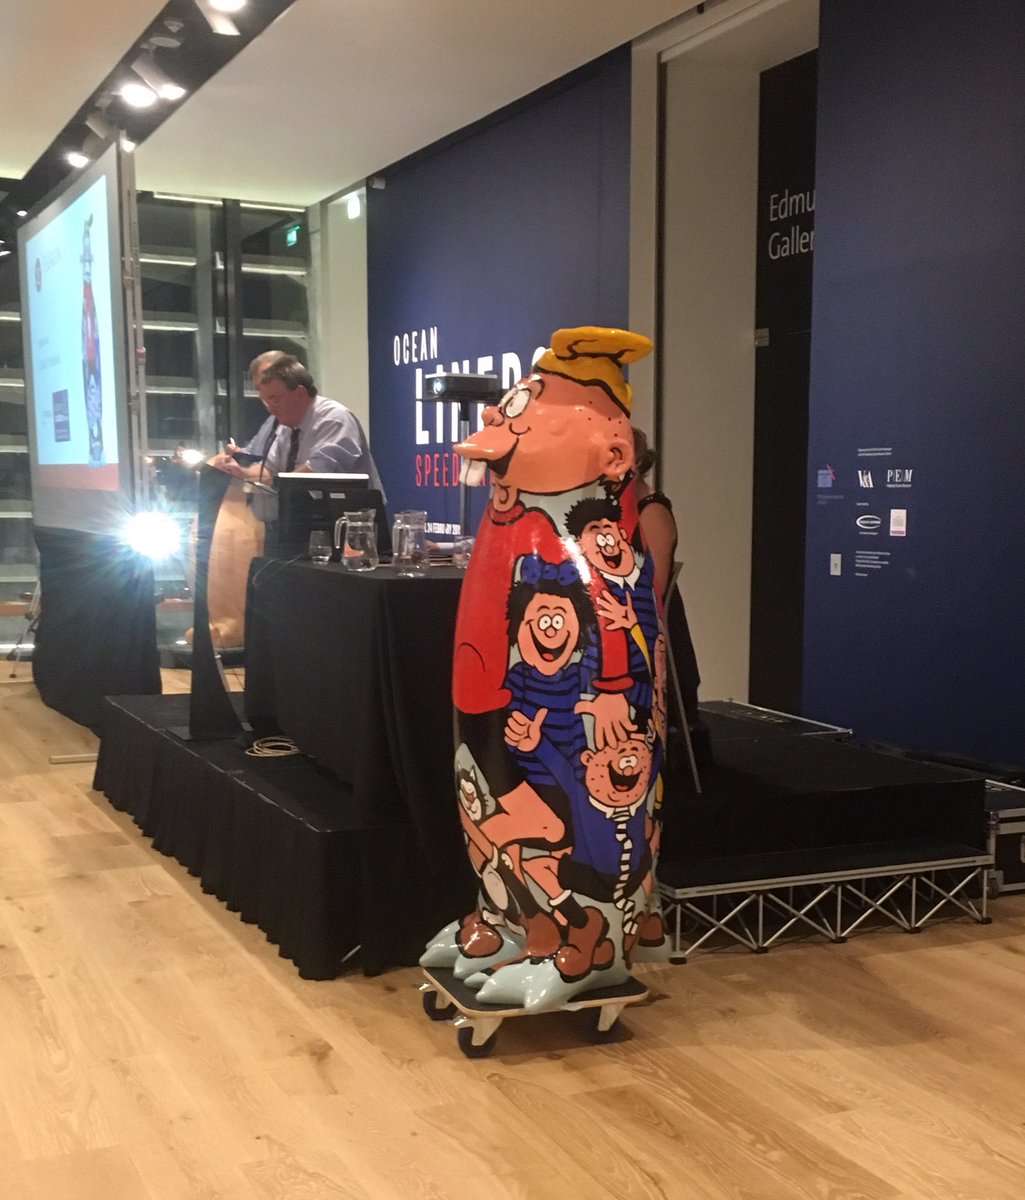 Number 25 of 82 penguins being auctioned off tonight is our famous 'Pluguin' designed by Lesley D McKenzie and sponsored by @LACDundee who lived at the @McManusDundee in #mcmenace over the summer #maggiespenguinparade